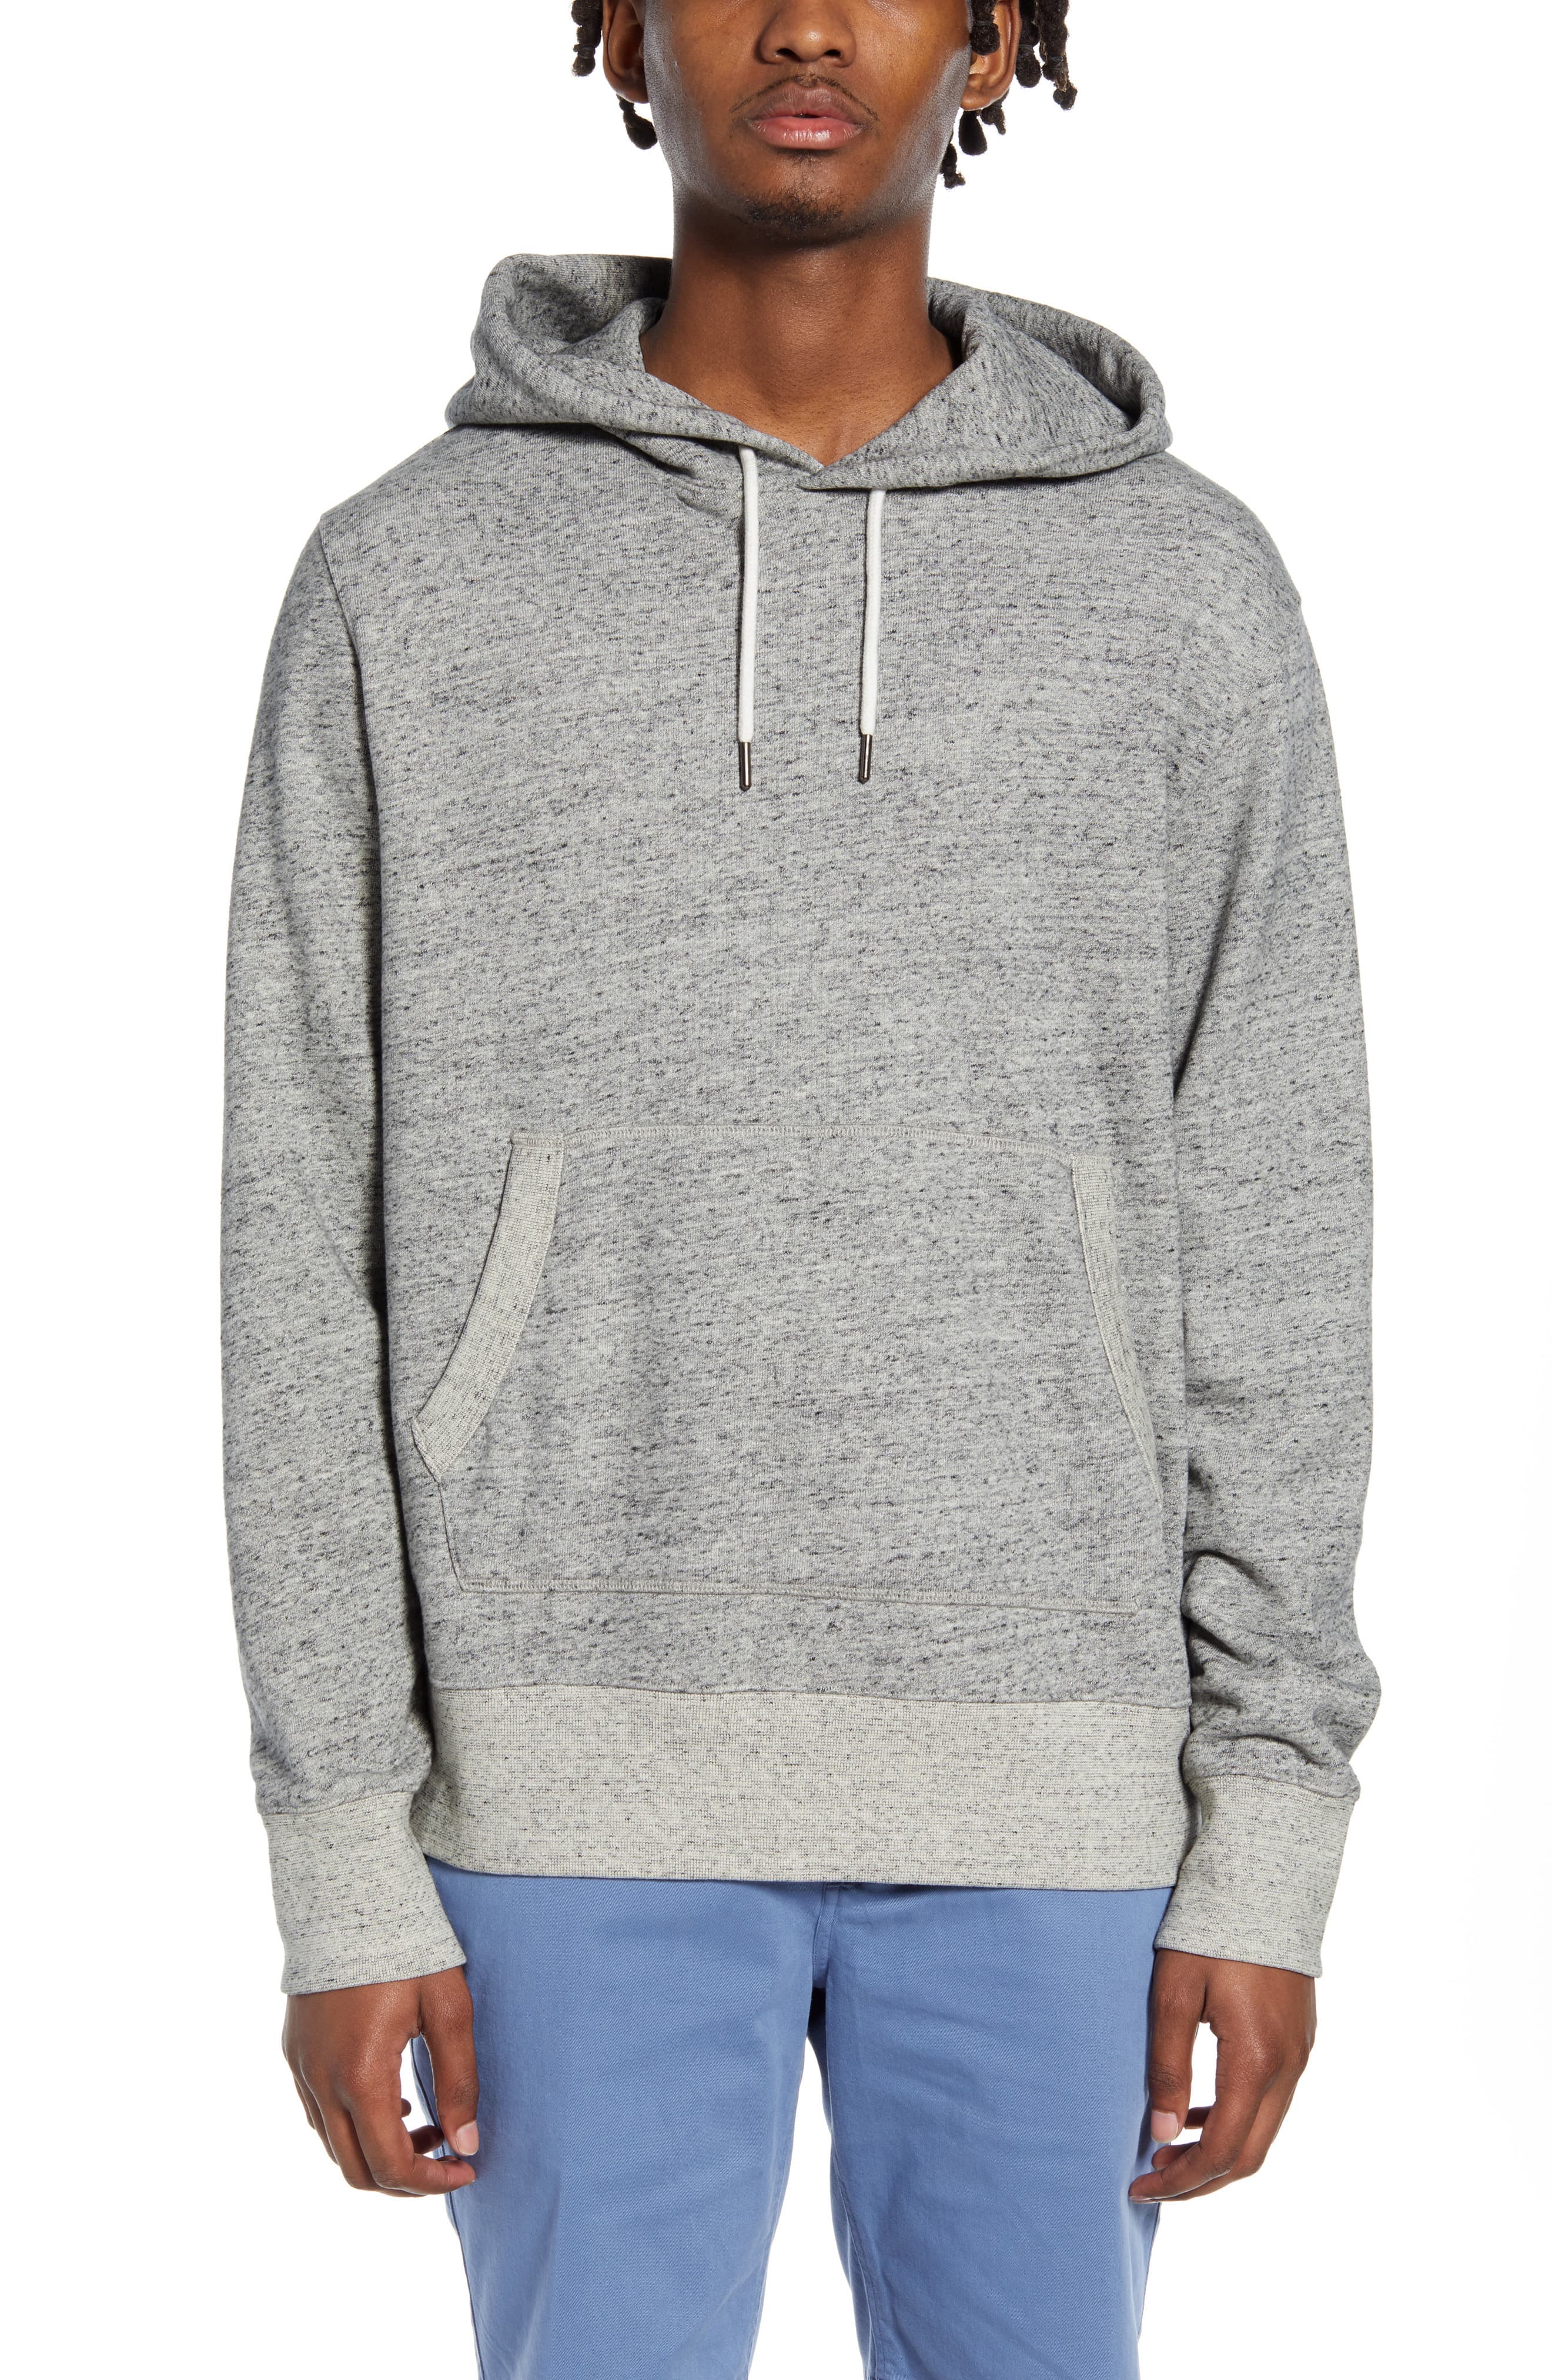 Men’s Madewell Pullover Hoodie Sweatshirt, Size Small – Grey | The ...